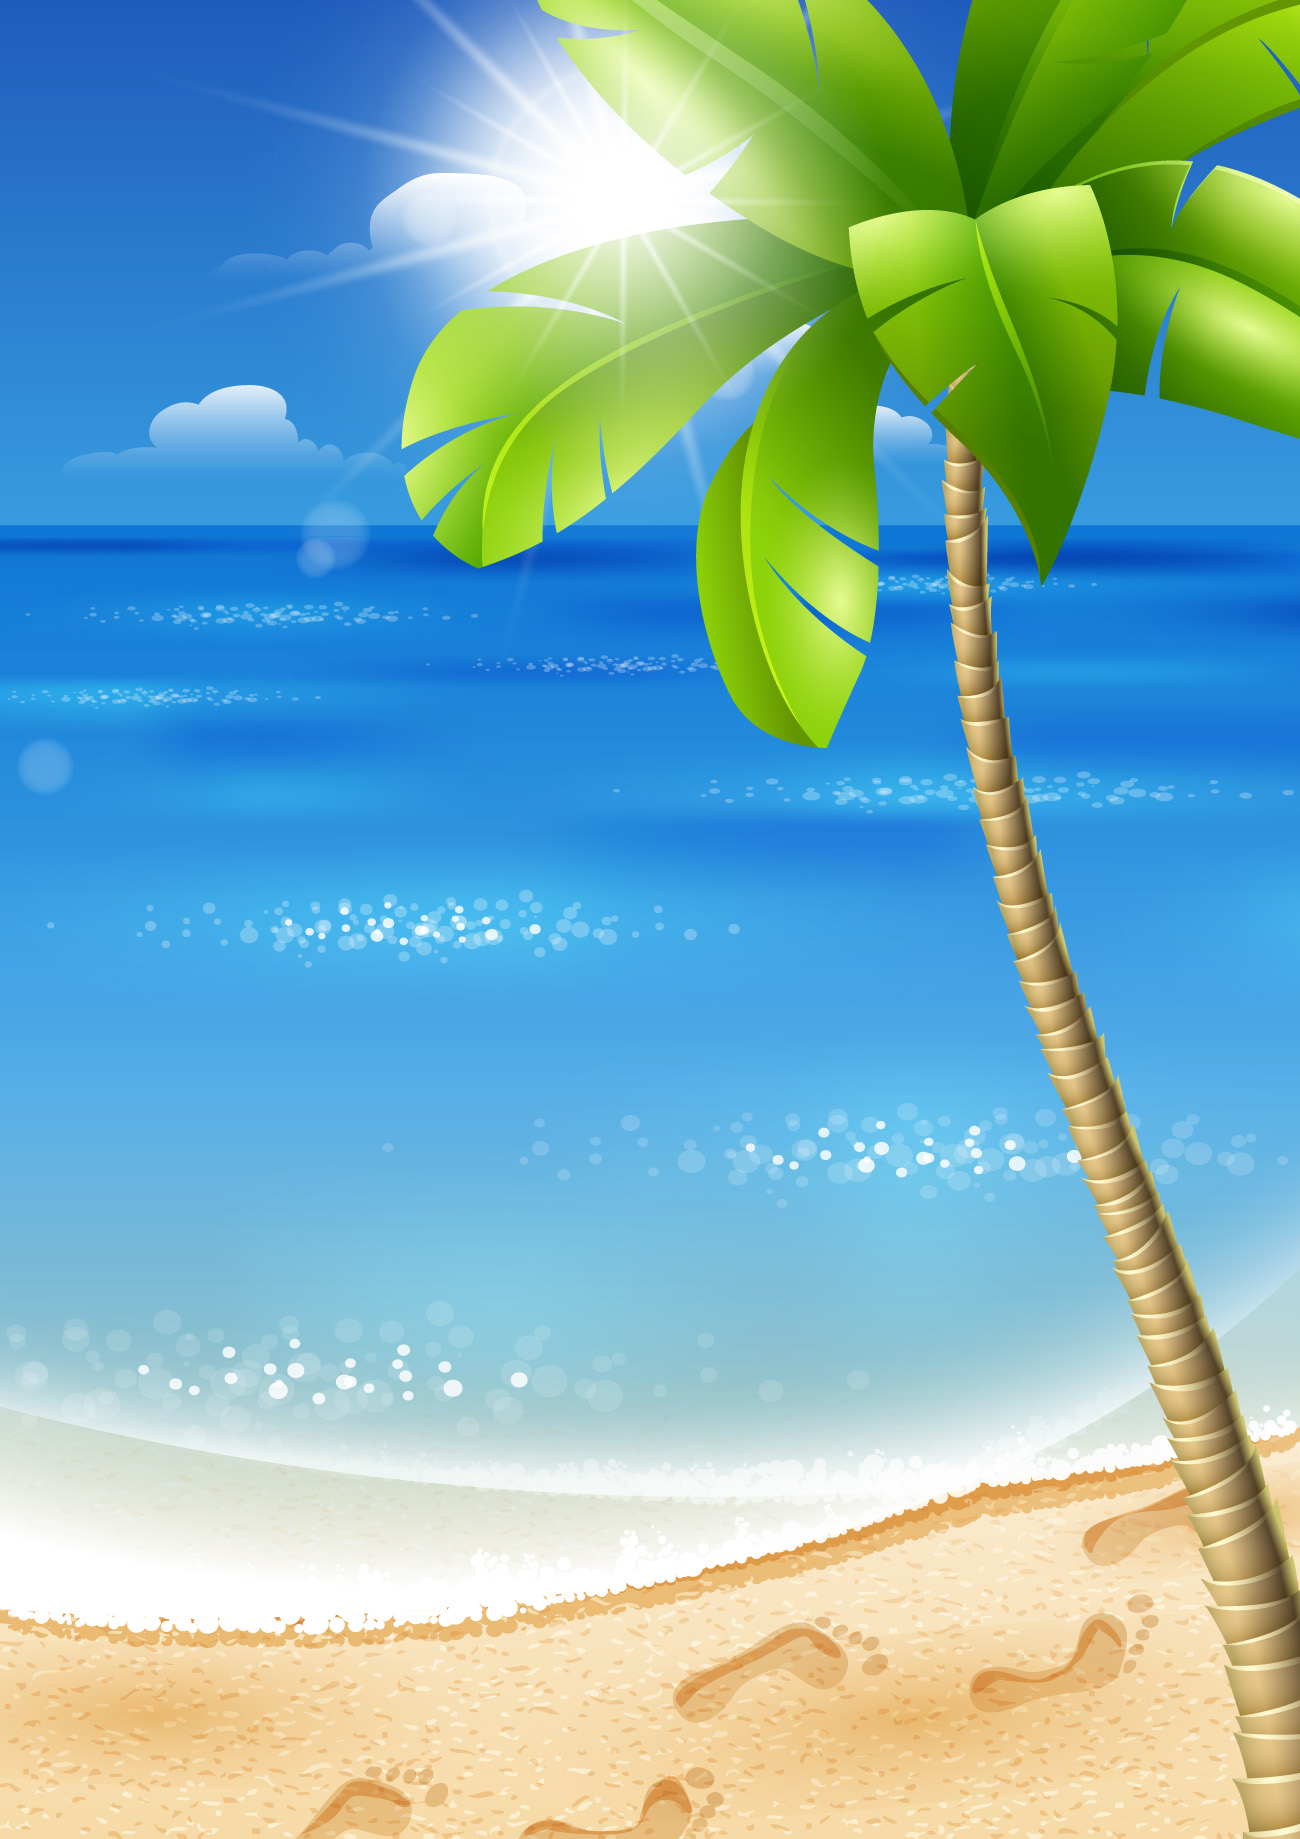 Beautiful Tropical Backgrounds vector 02  